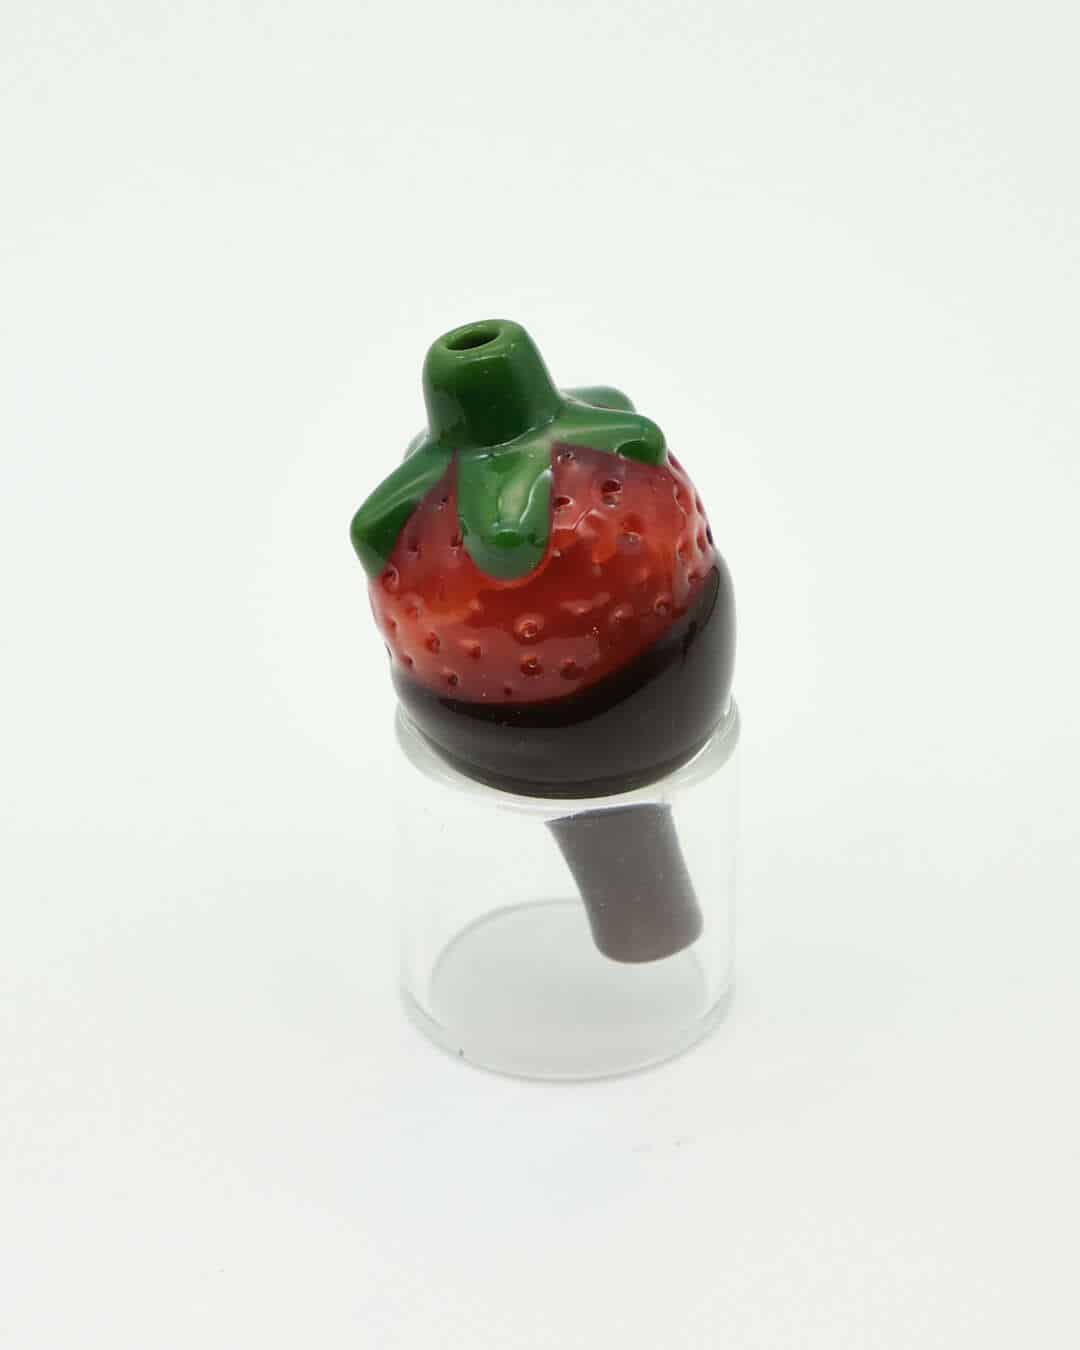 soft design of the Chocolate Strawberry Bubble Carb Cap by Gnarla Carla